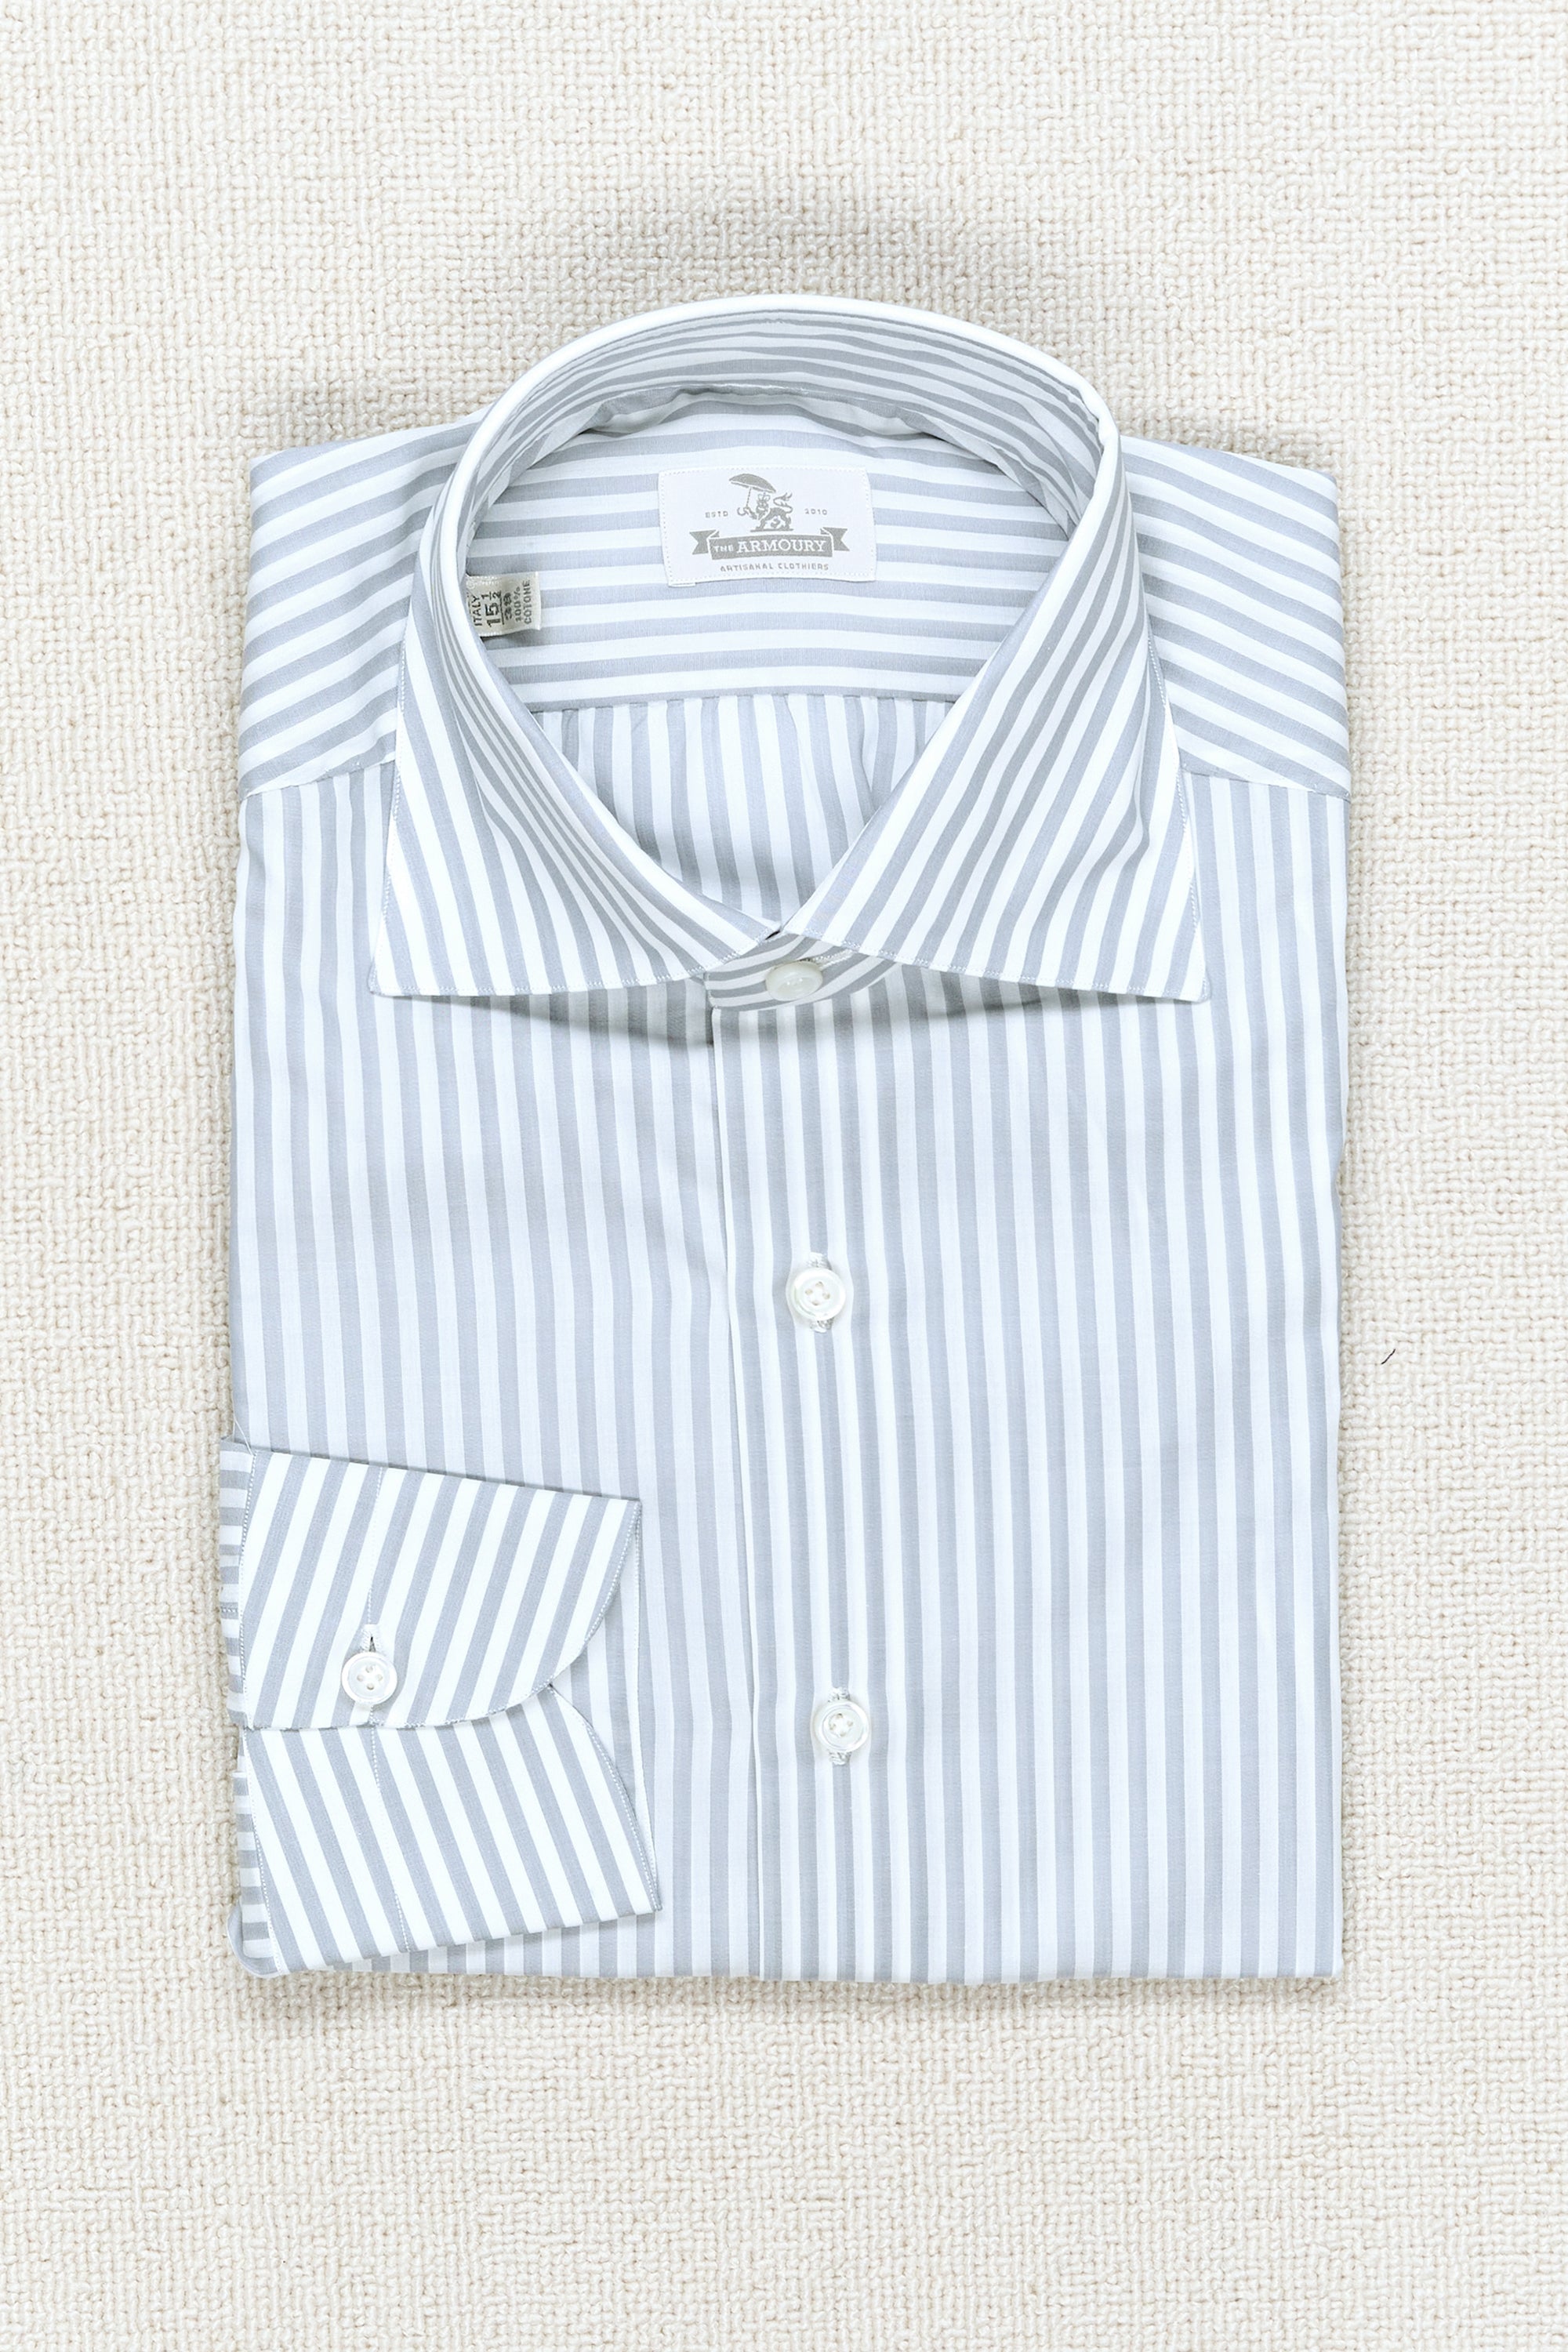 The Armoury Exclusive Carlo Riva White/Grey Butcher Stripe Cotton Spread Collar with Clean Collar Stitching Shirt